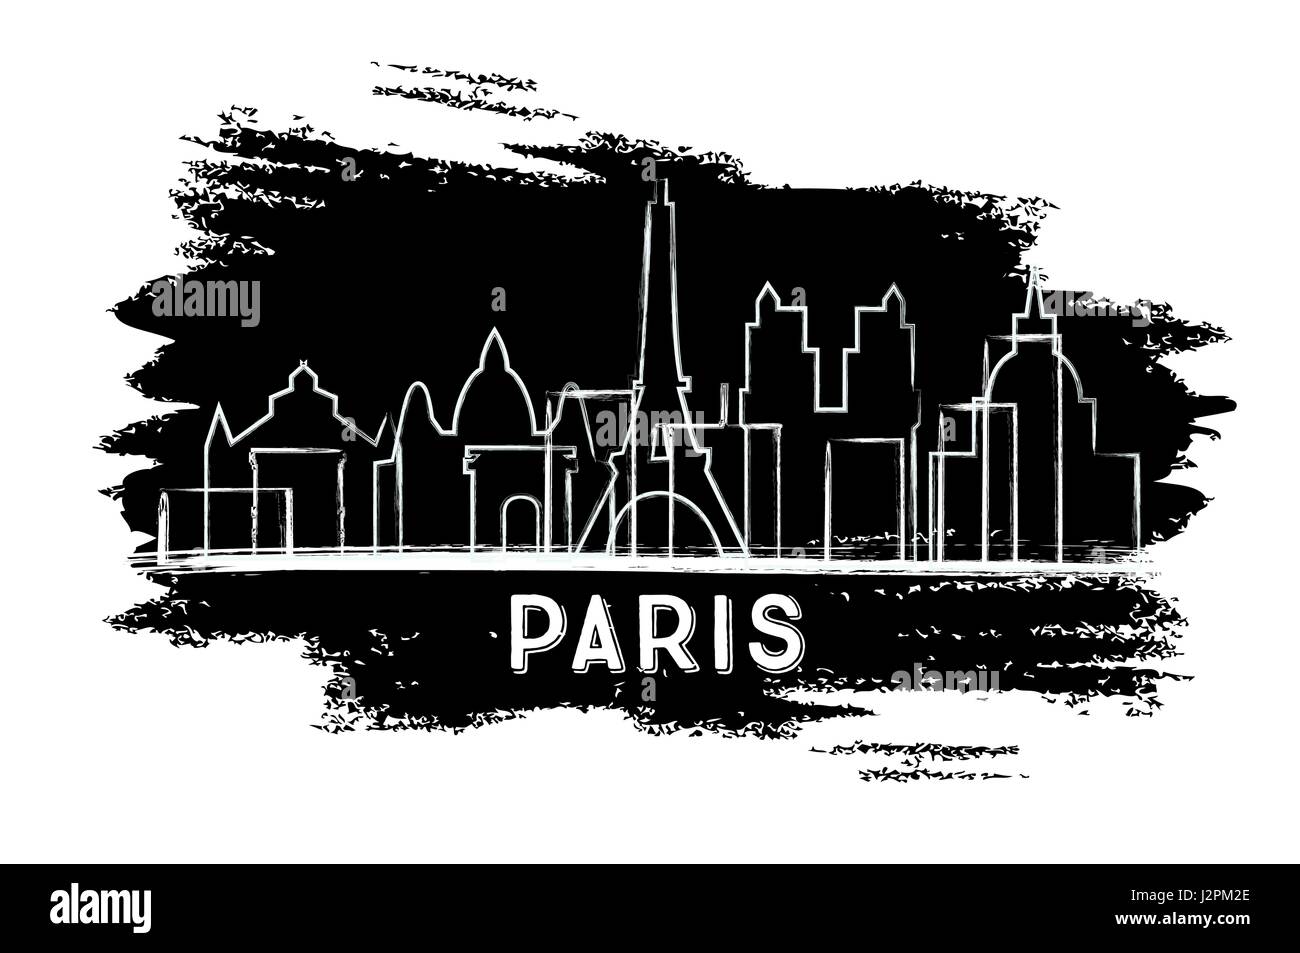 Paris Skyline Silhouette. Hand Drawn Sketch. Business Travel and Tourism Concept with Historic Architecture. Stock Vector